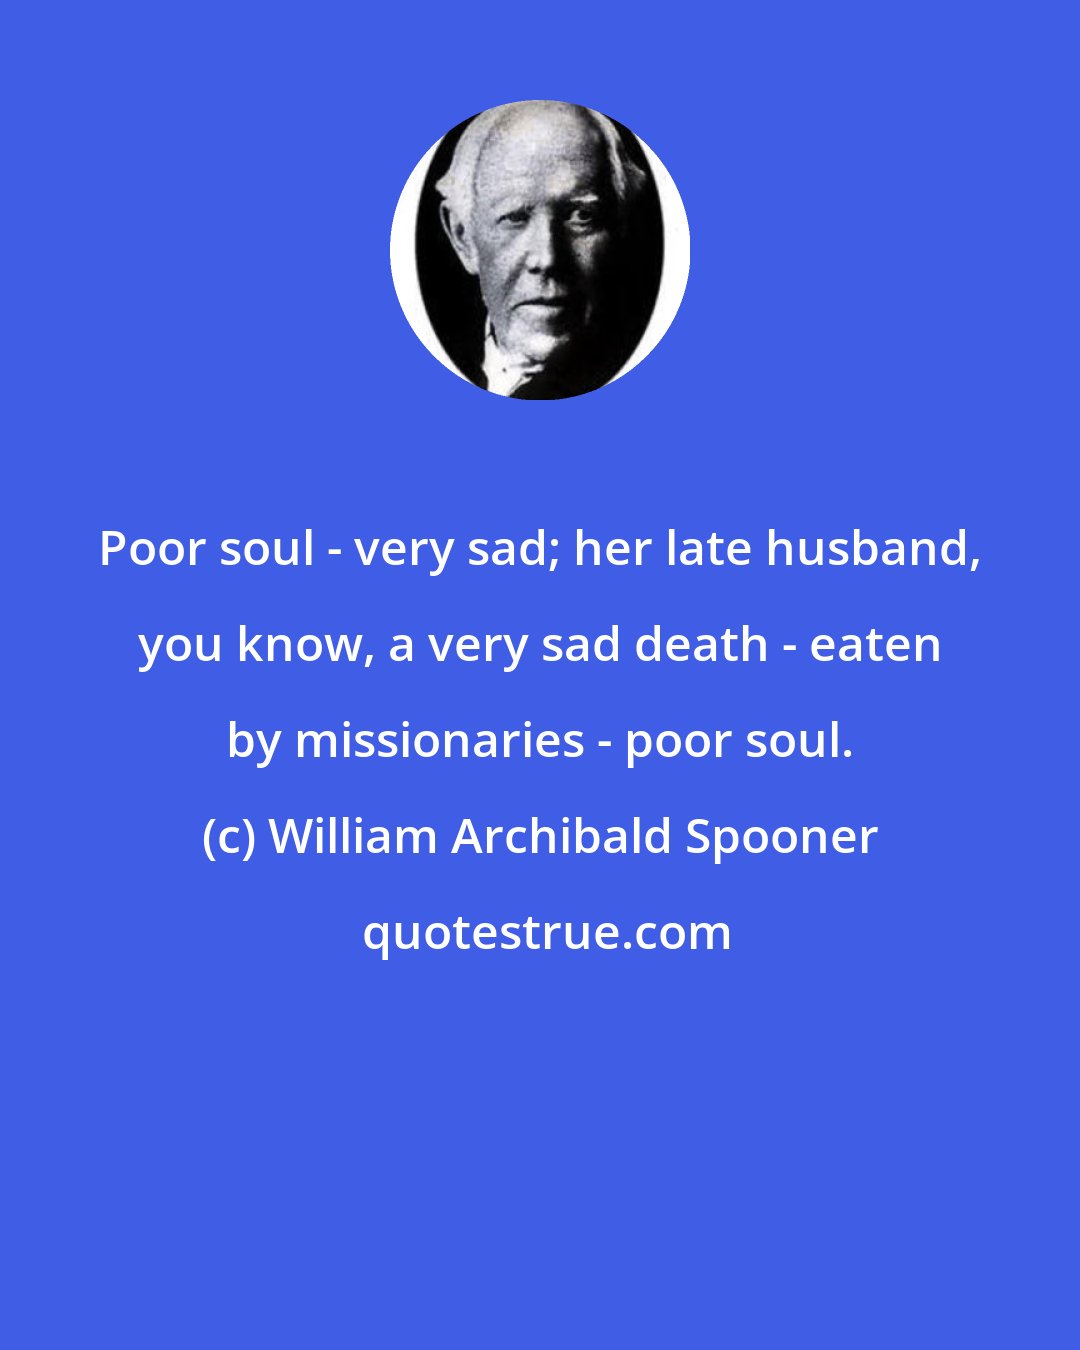 William Archibald Spooner: Poor soul - very sad; her late husband, you know, a very sad death - eaten by missionaries - poor soul.